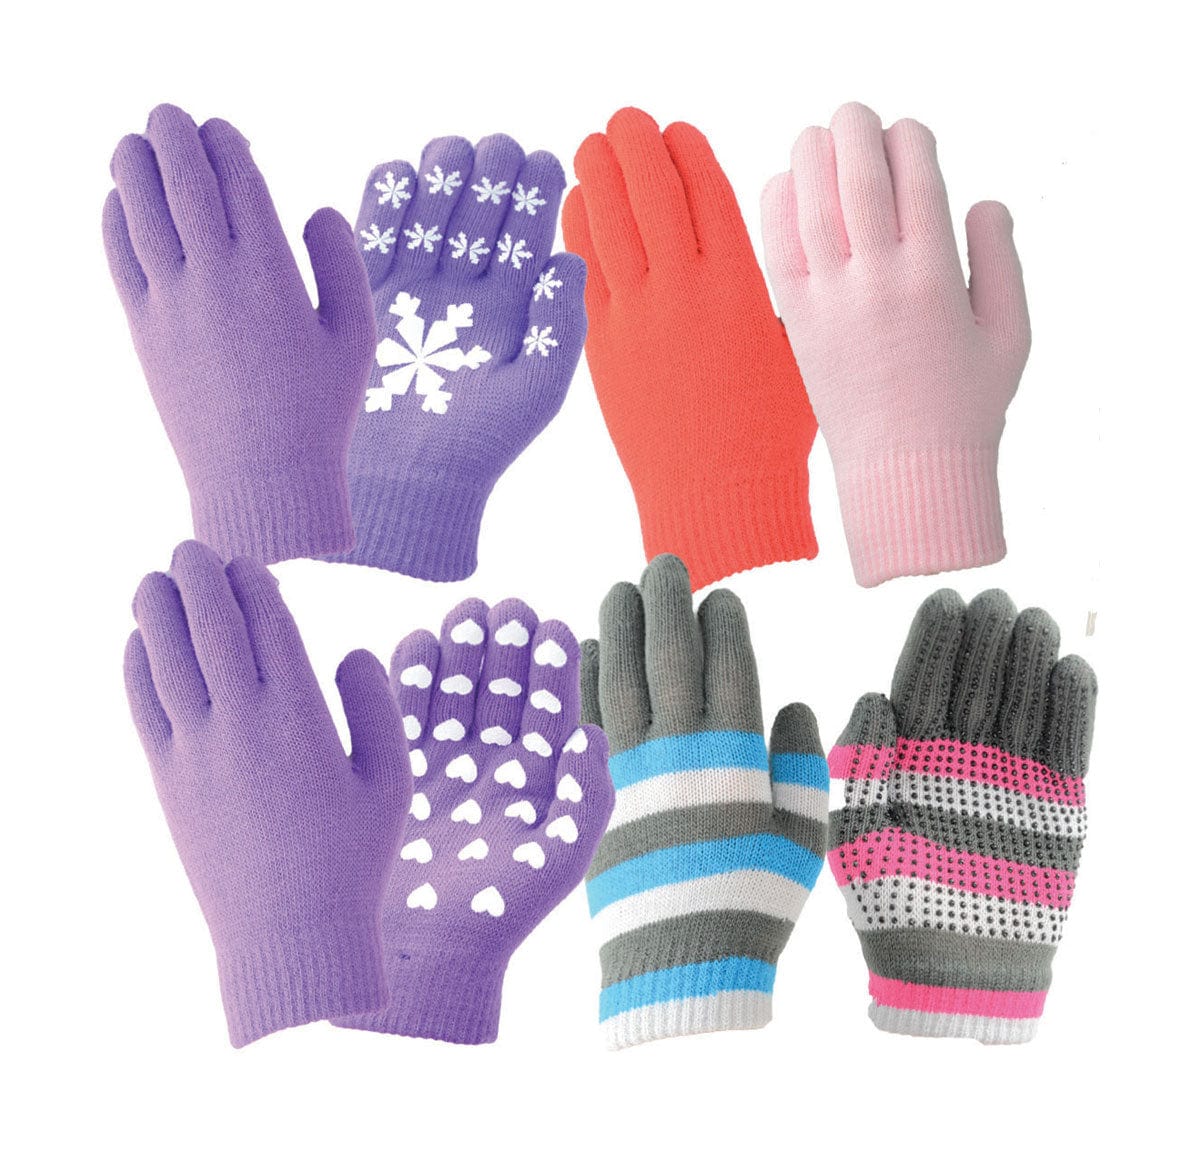 Hy equestrian magic patterned gloves